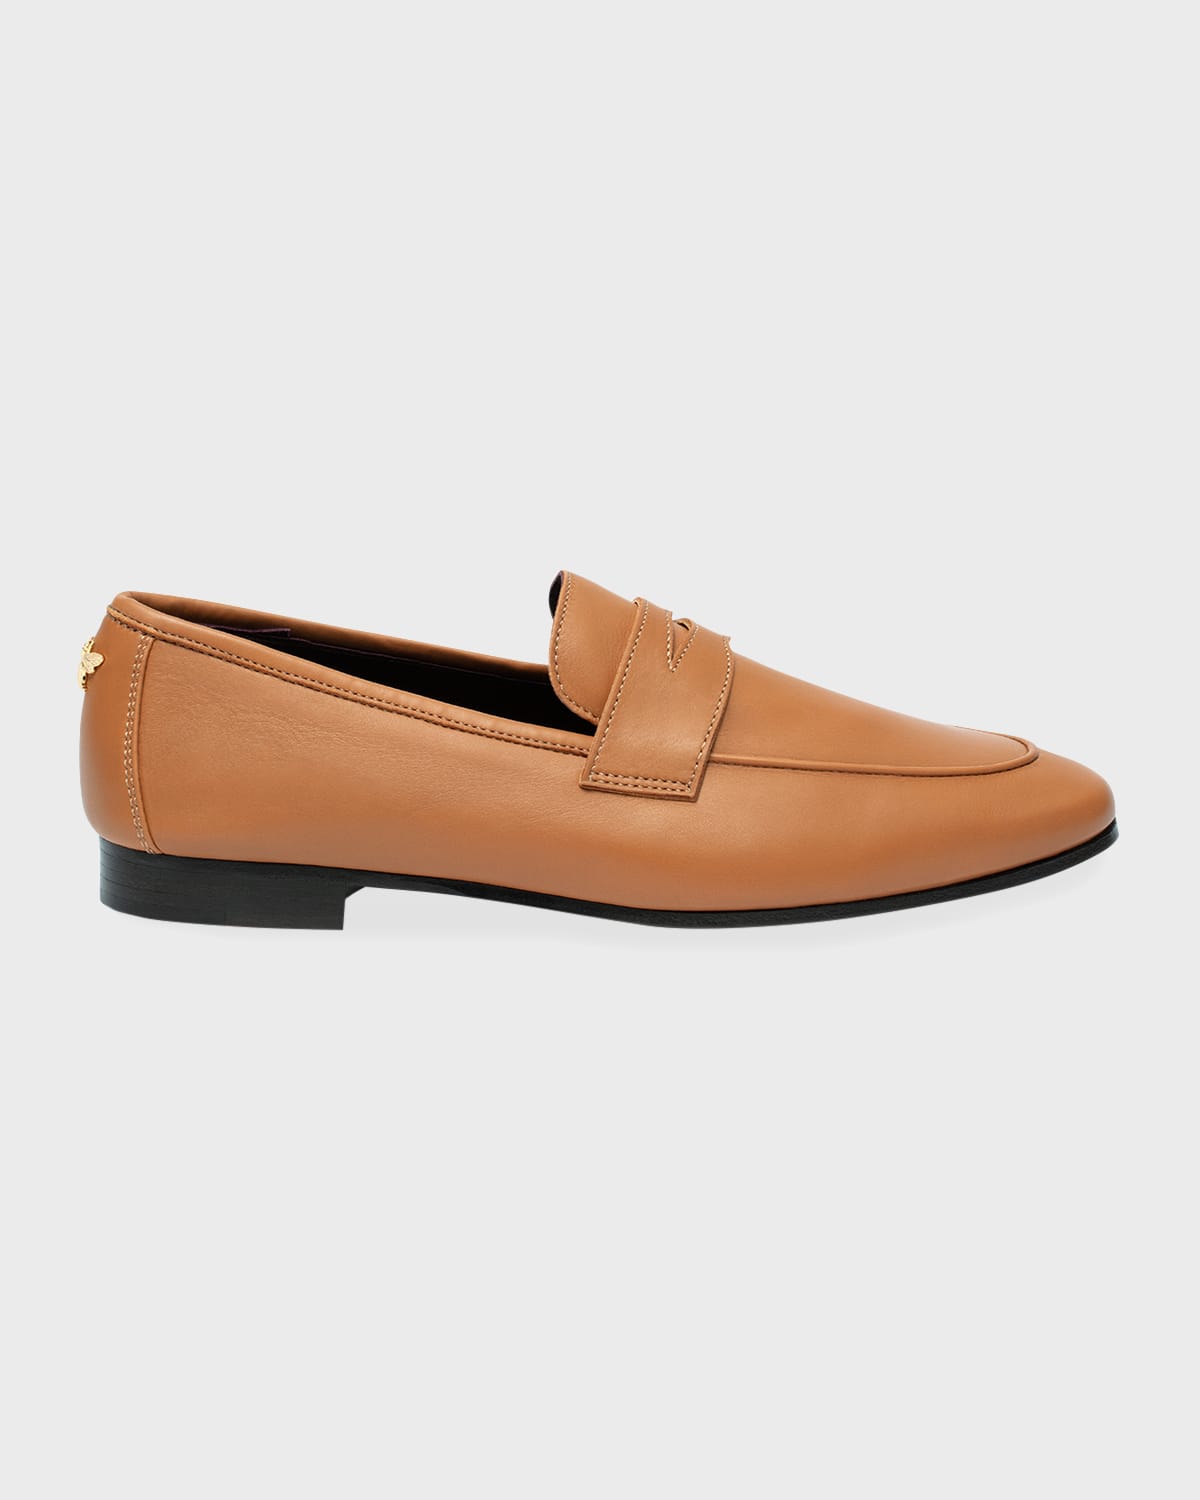 Bougeotte Acajou Leather Penny Loafers